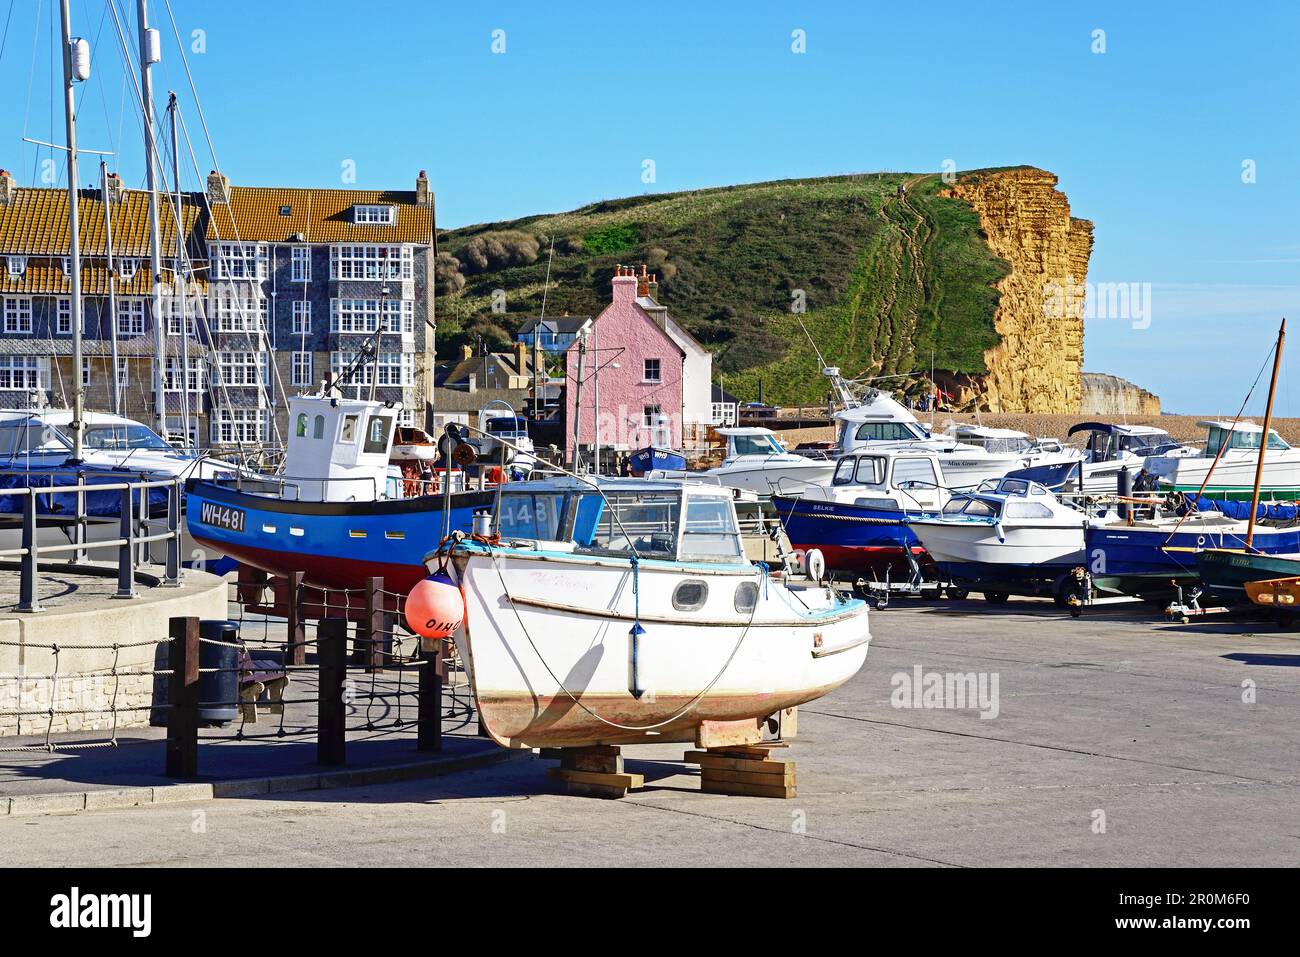 Boats in dry dock along the promenade pier with views towards the pebble beach and Jurassic Coast cliffs, West Bay, Dorset, UK. Stock Photo